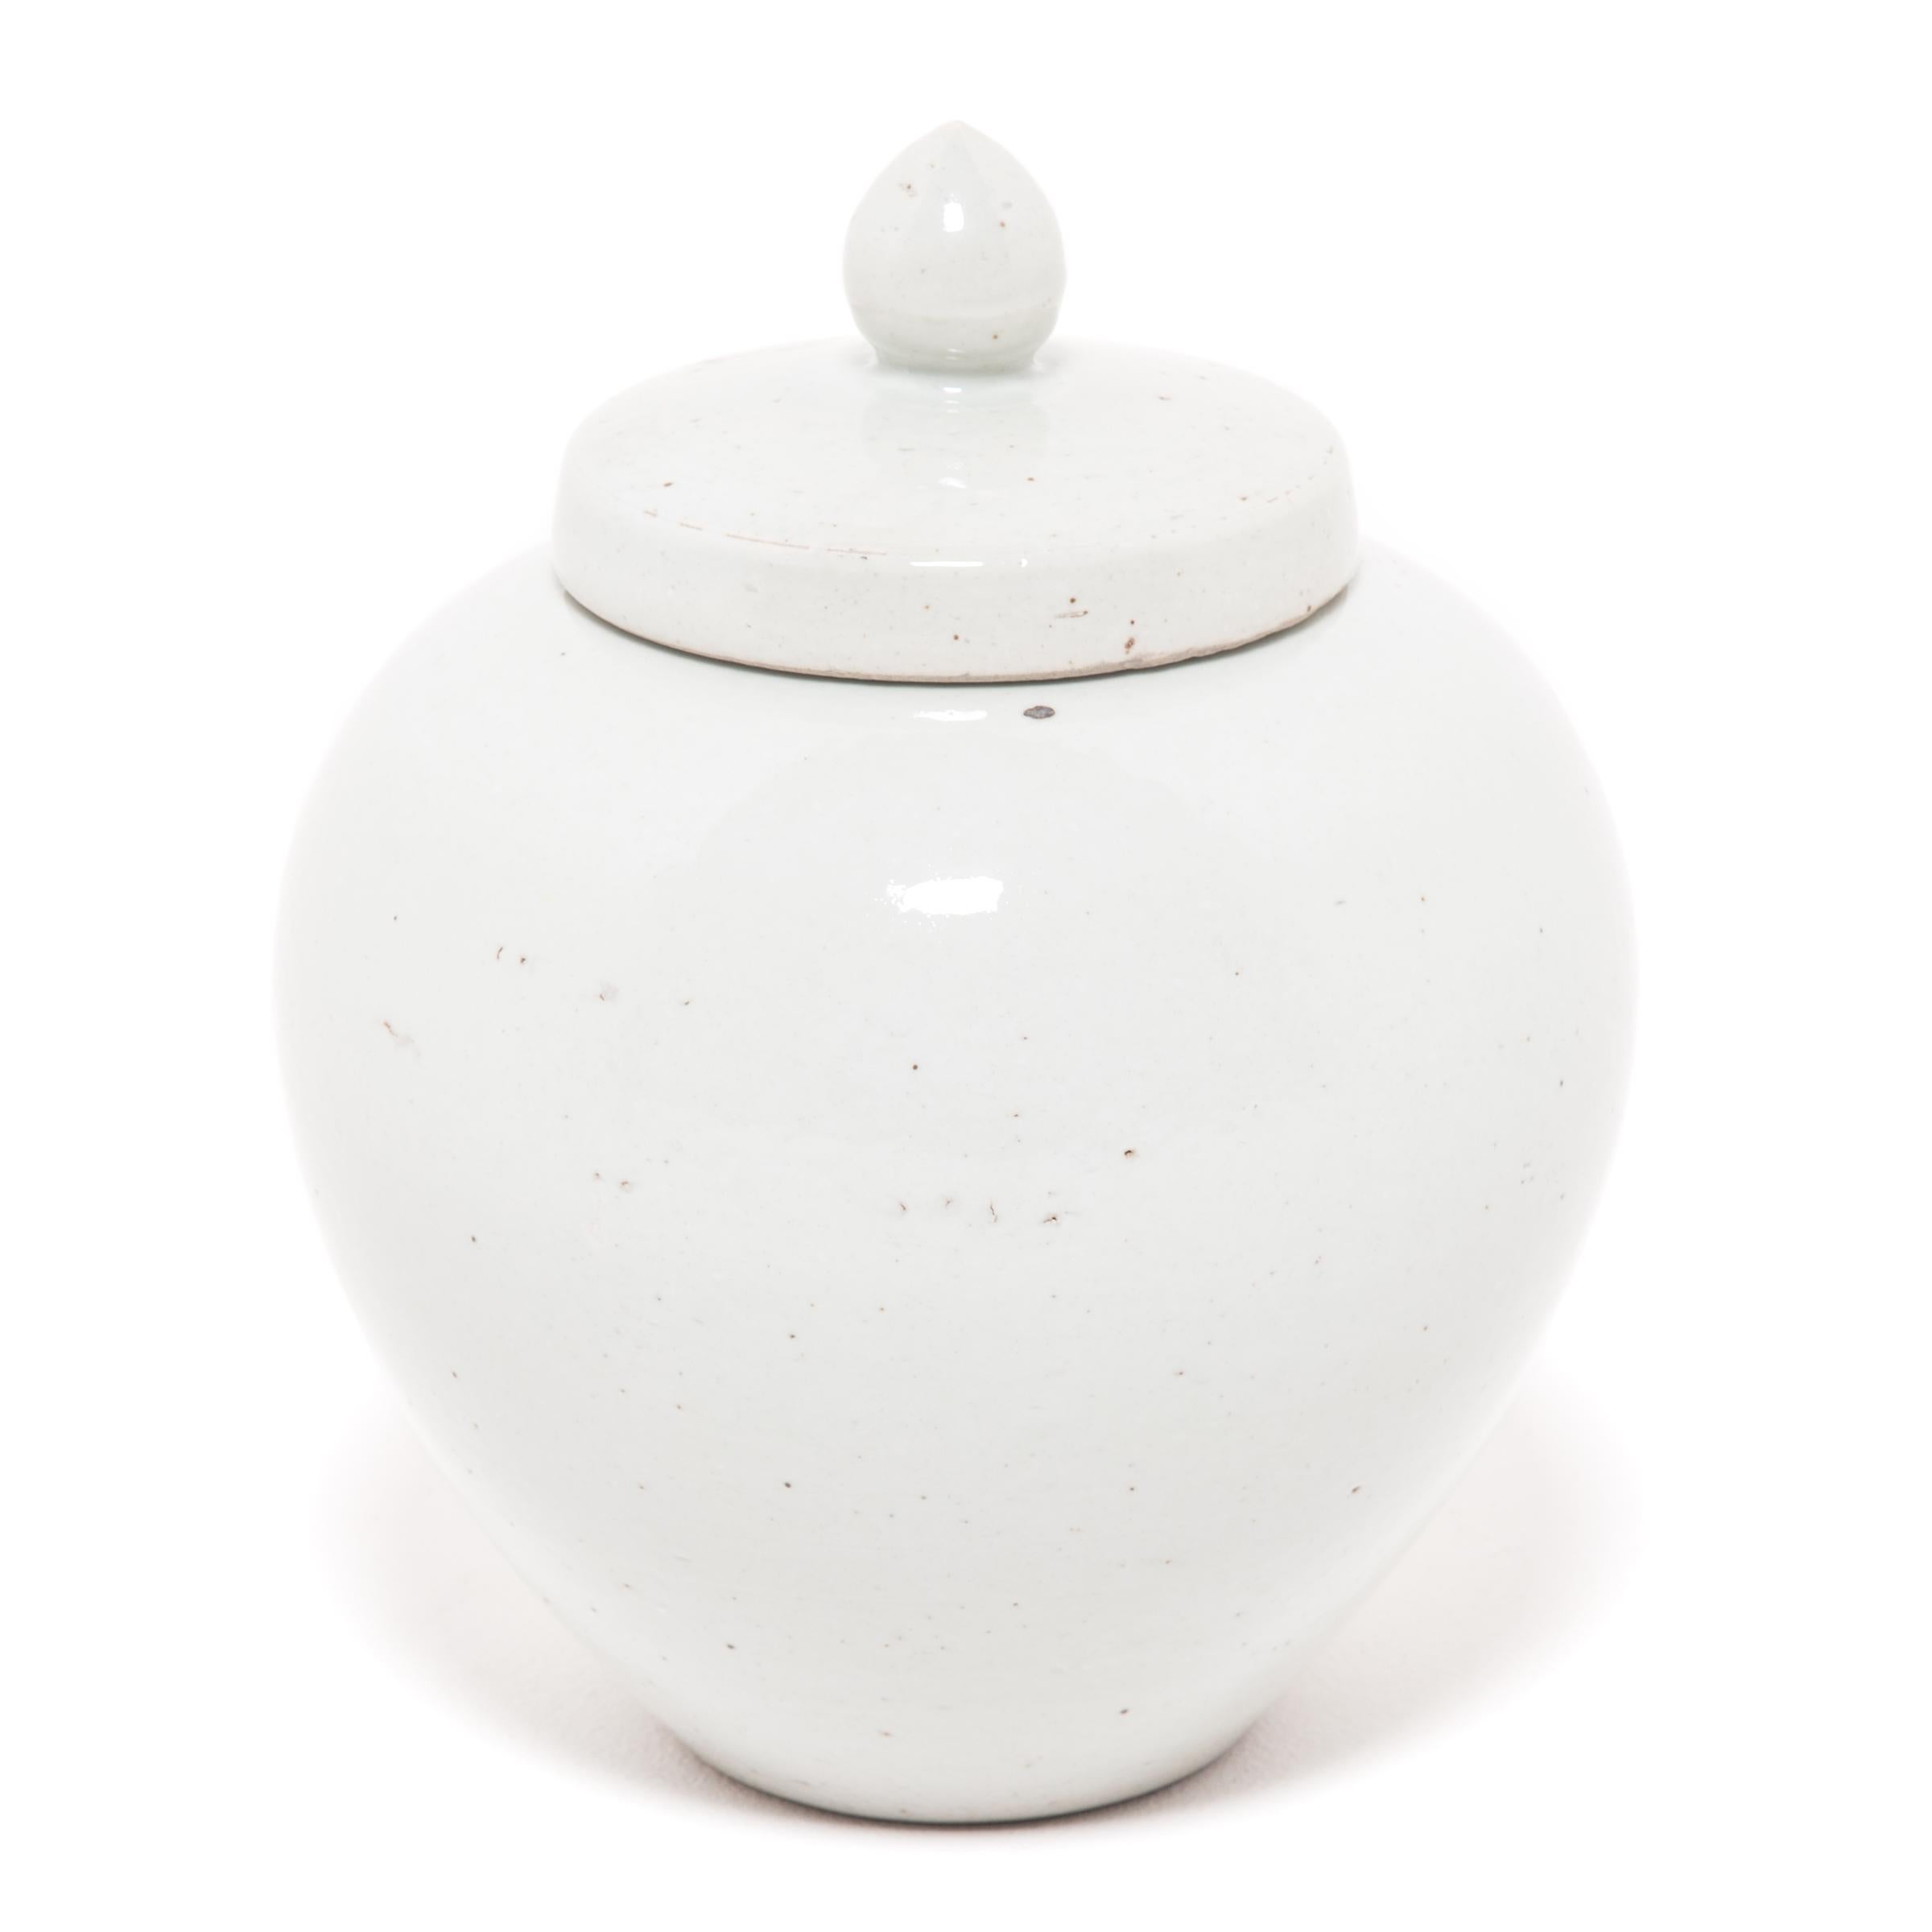 Drawing on a long Chinese tradition of monochrome ceramics, this round porcelain jar is glazed in serene, cloud-inspired white with celadon undertones. Sculpted by artisans in China's Zhejiang province, the jar has an impressive sculptural form with